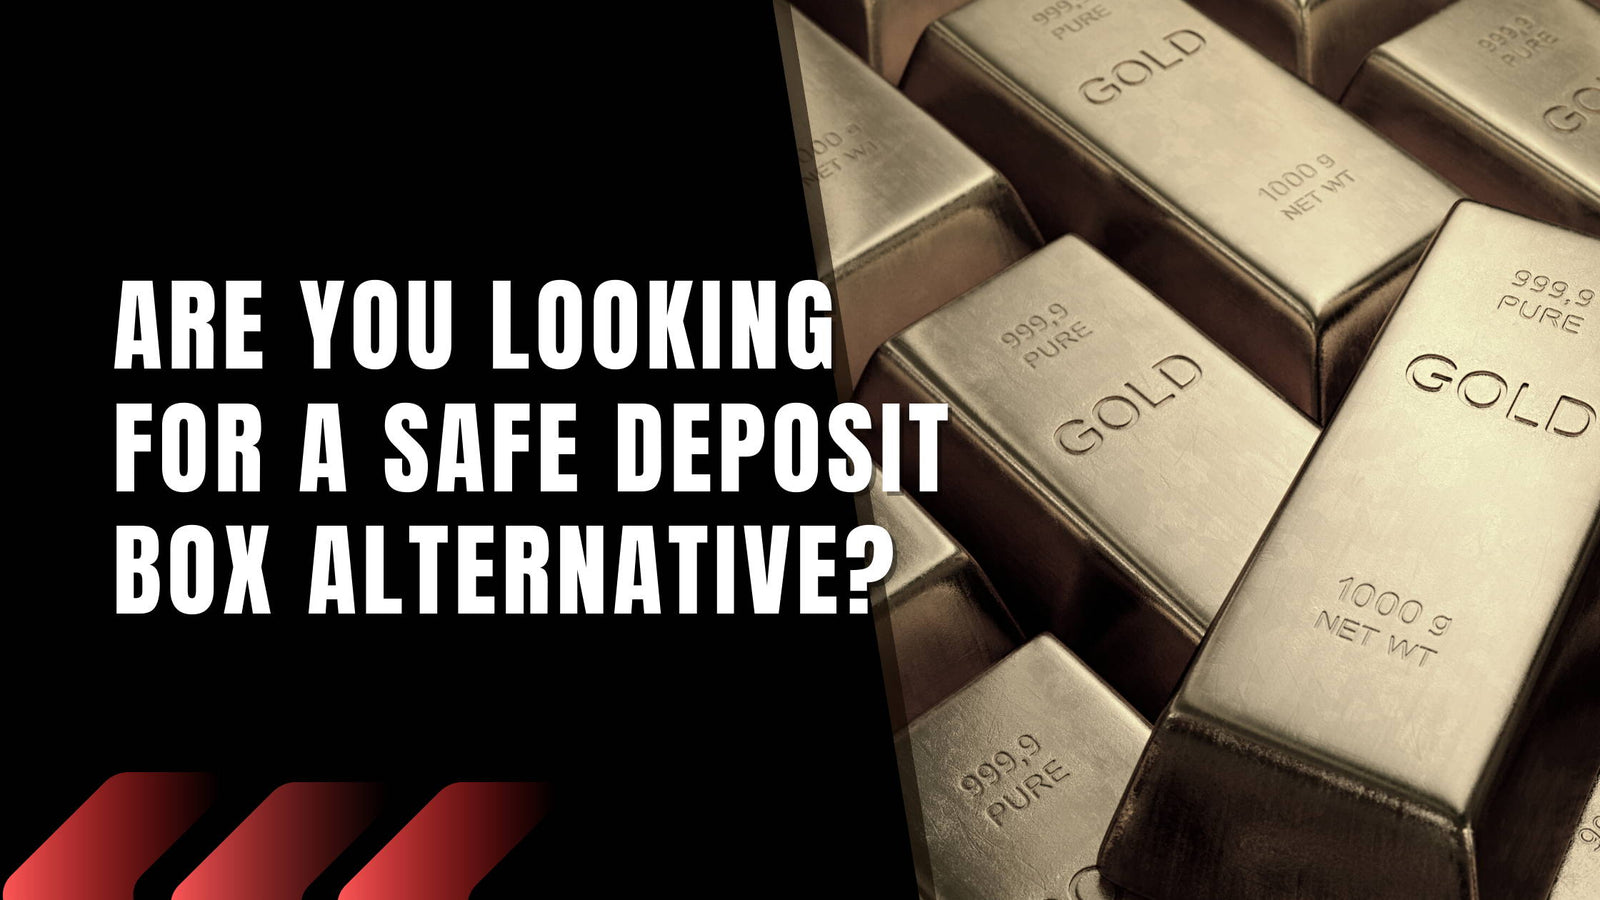 Are You Looking for a Safe Deposit Box Alternative?